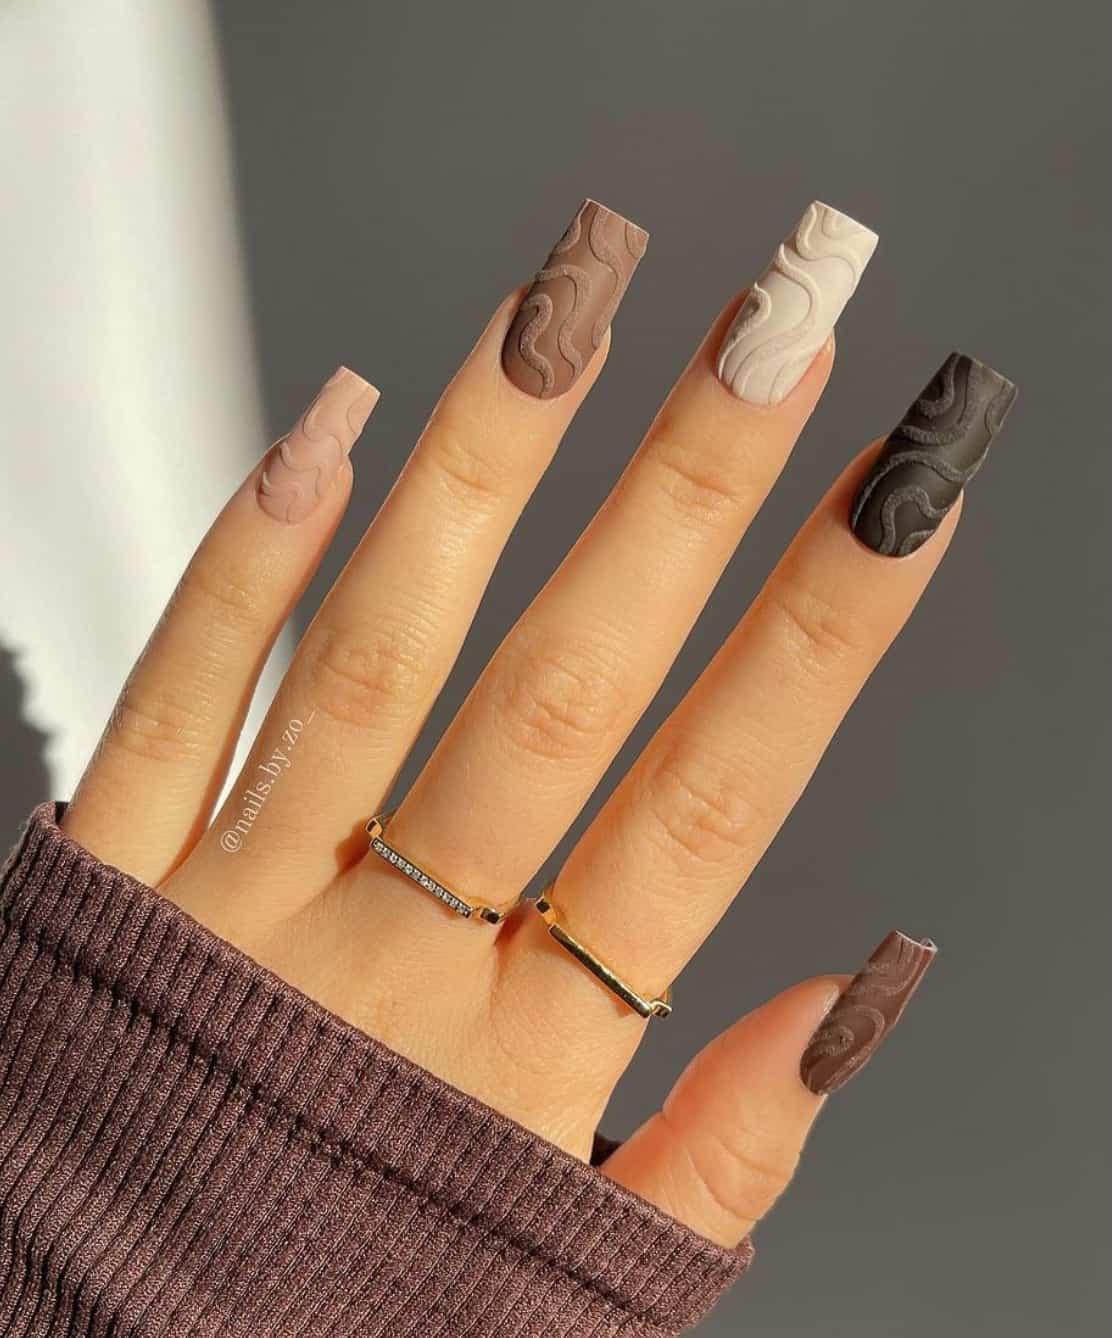 A hand with long square nails featuring a gradient design with brown, beige, cream, and black and swirl details with a matte finish